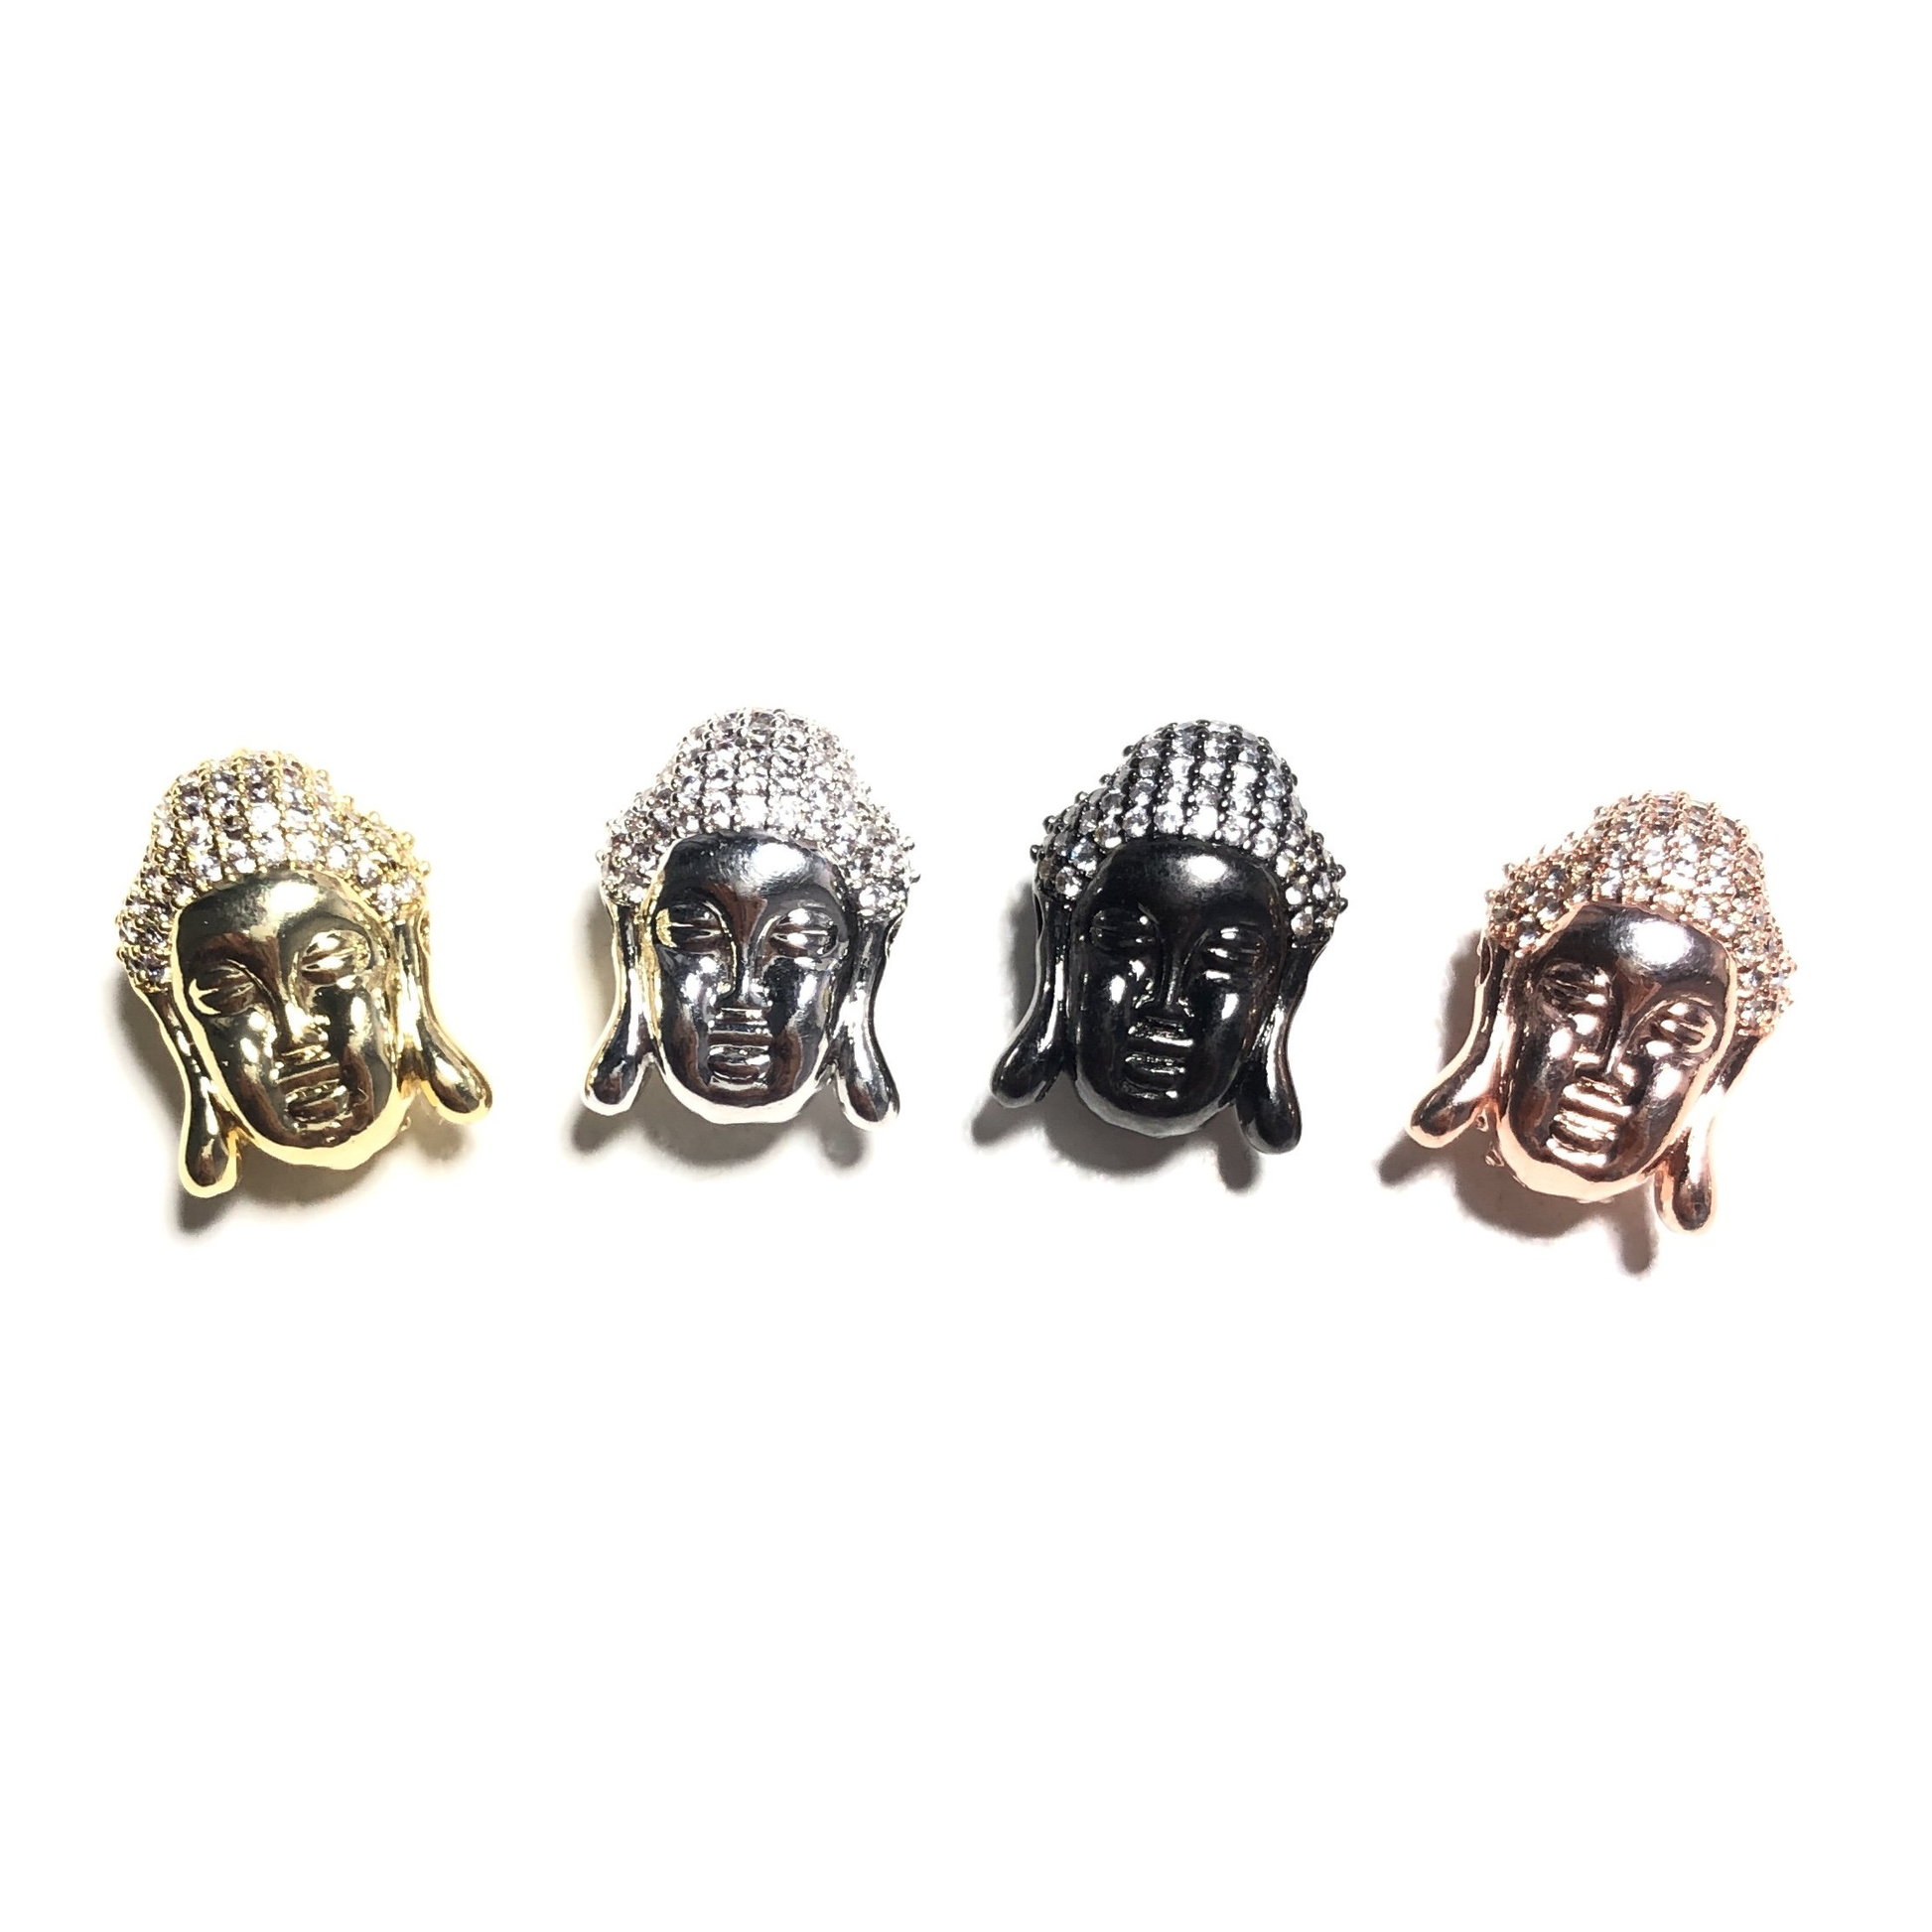 10pcs/lot 18*14mm CZ Paved Buddha Spacers CZ Paved Spacers Charms Beads Beyond